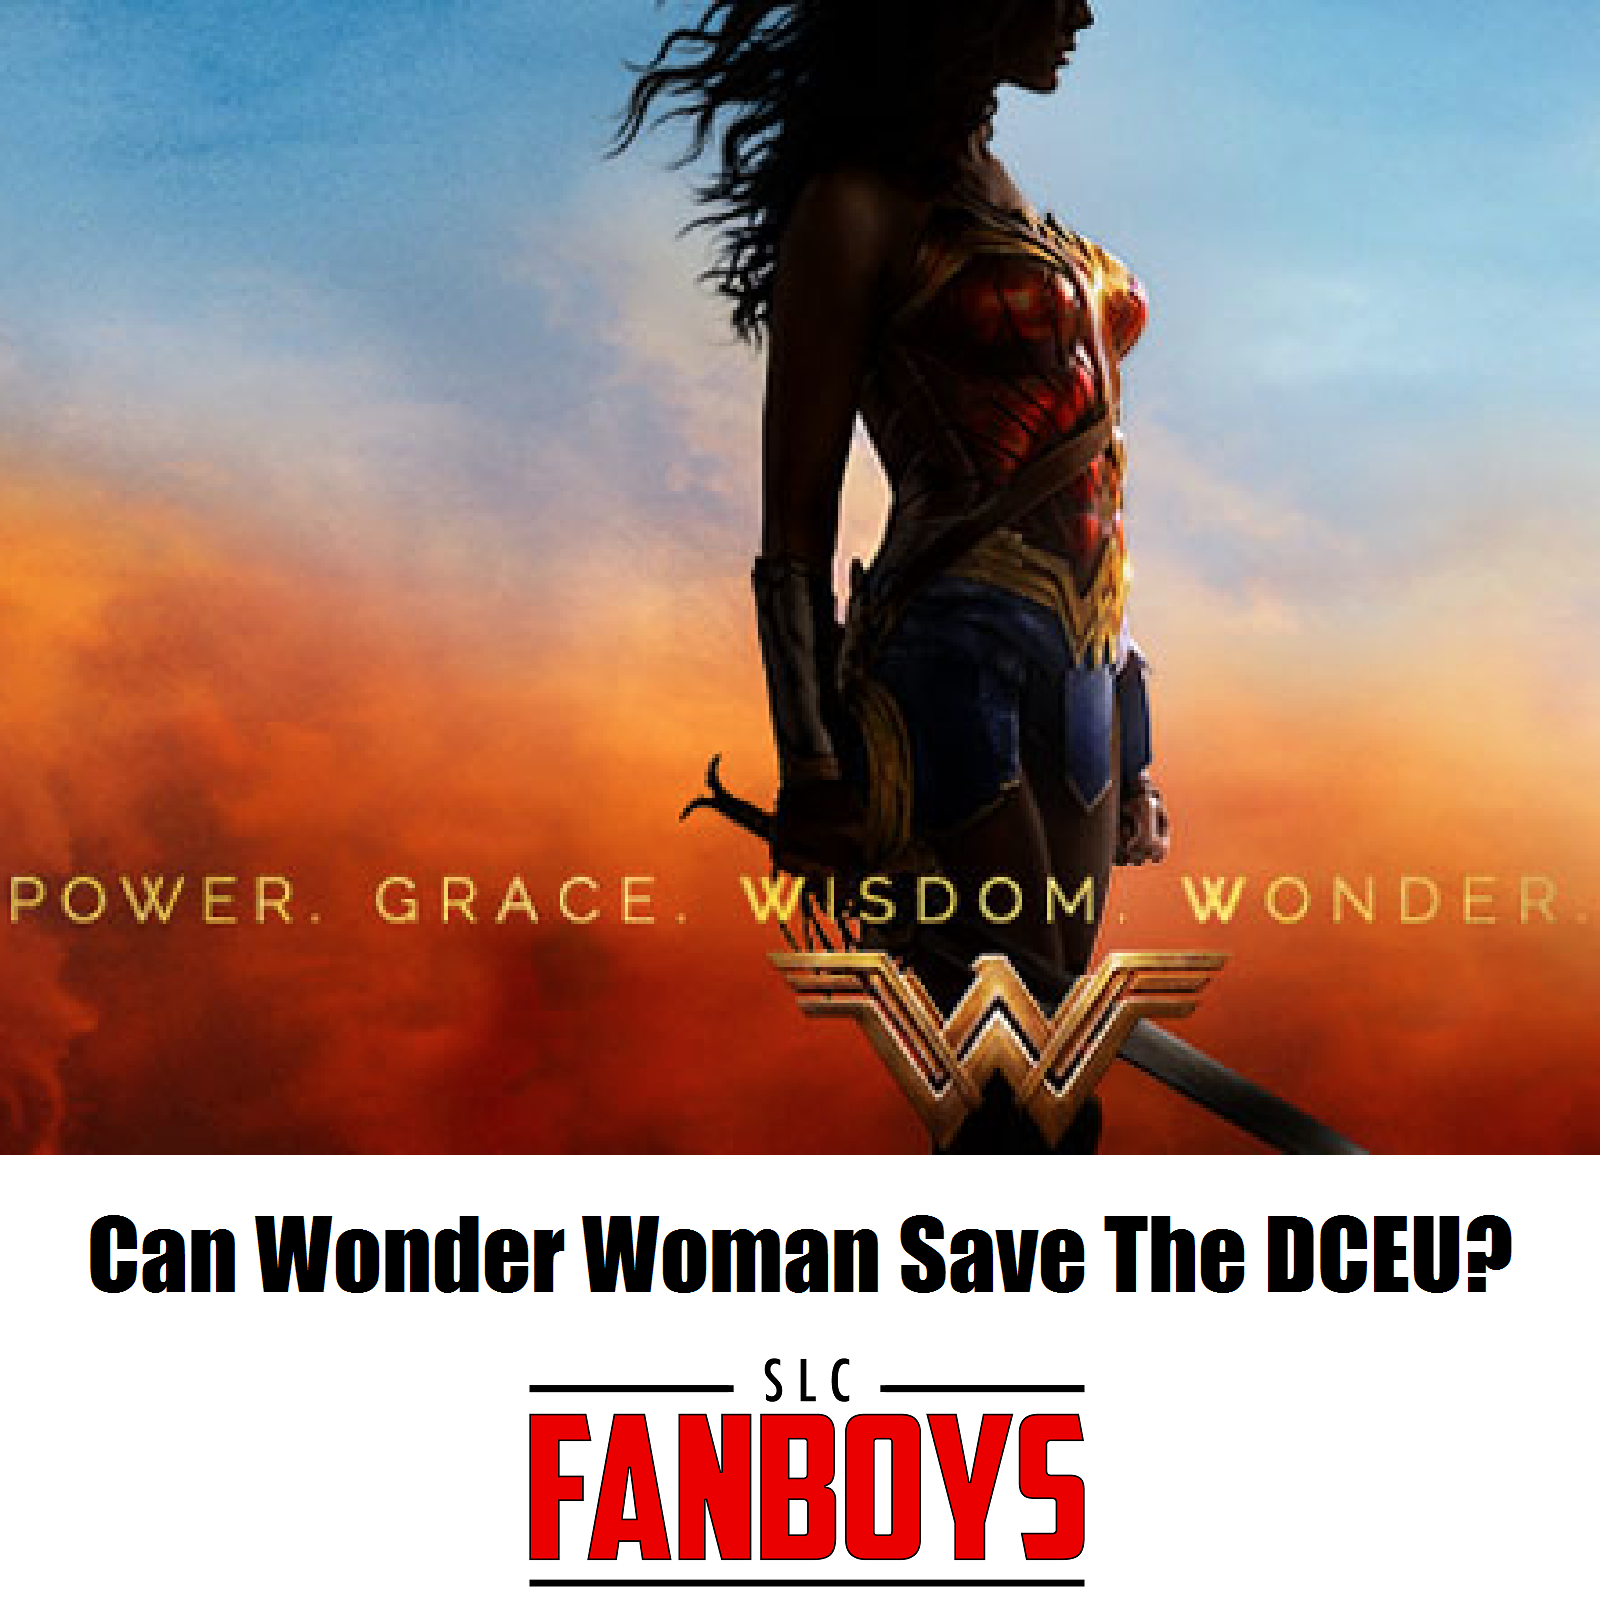 Can Wonder Woman Save the DCEU?